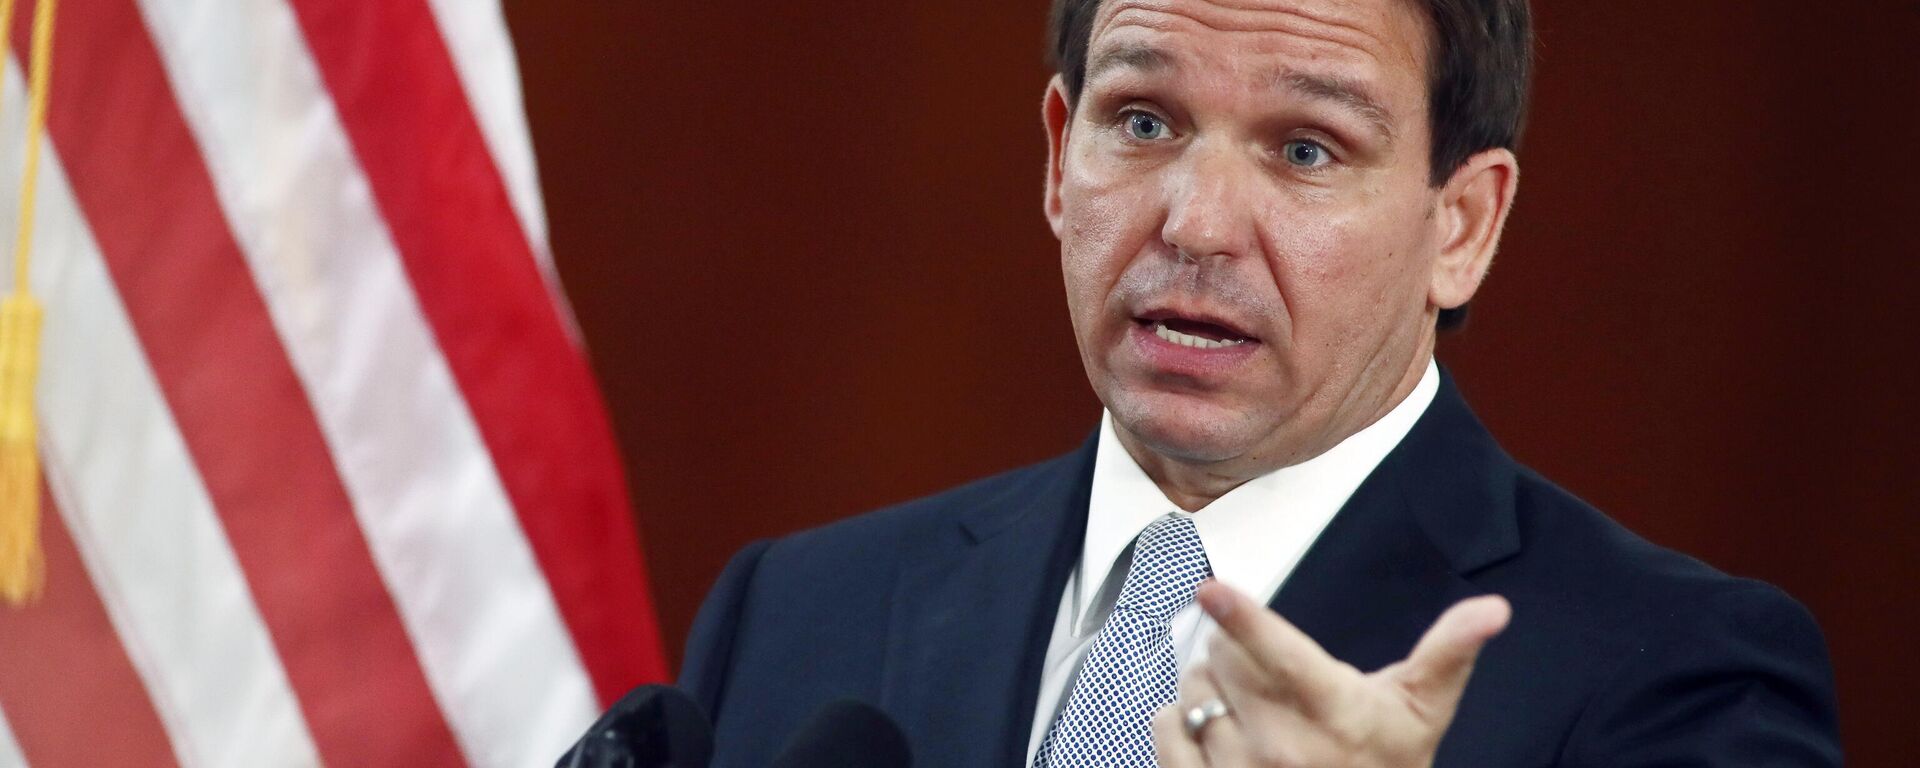 Florida Gov. Ron DeSantis answers questions from the media in the Florida Cabinet following his State of the State address during a joint session of the Senate and House of Representatives Tuesday, March 7, 2023, at the Capitol in Tallahassee, Fla. - Sputnik International, 1920, 13.05.2023